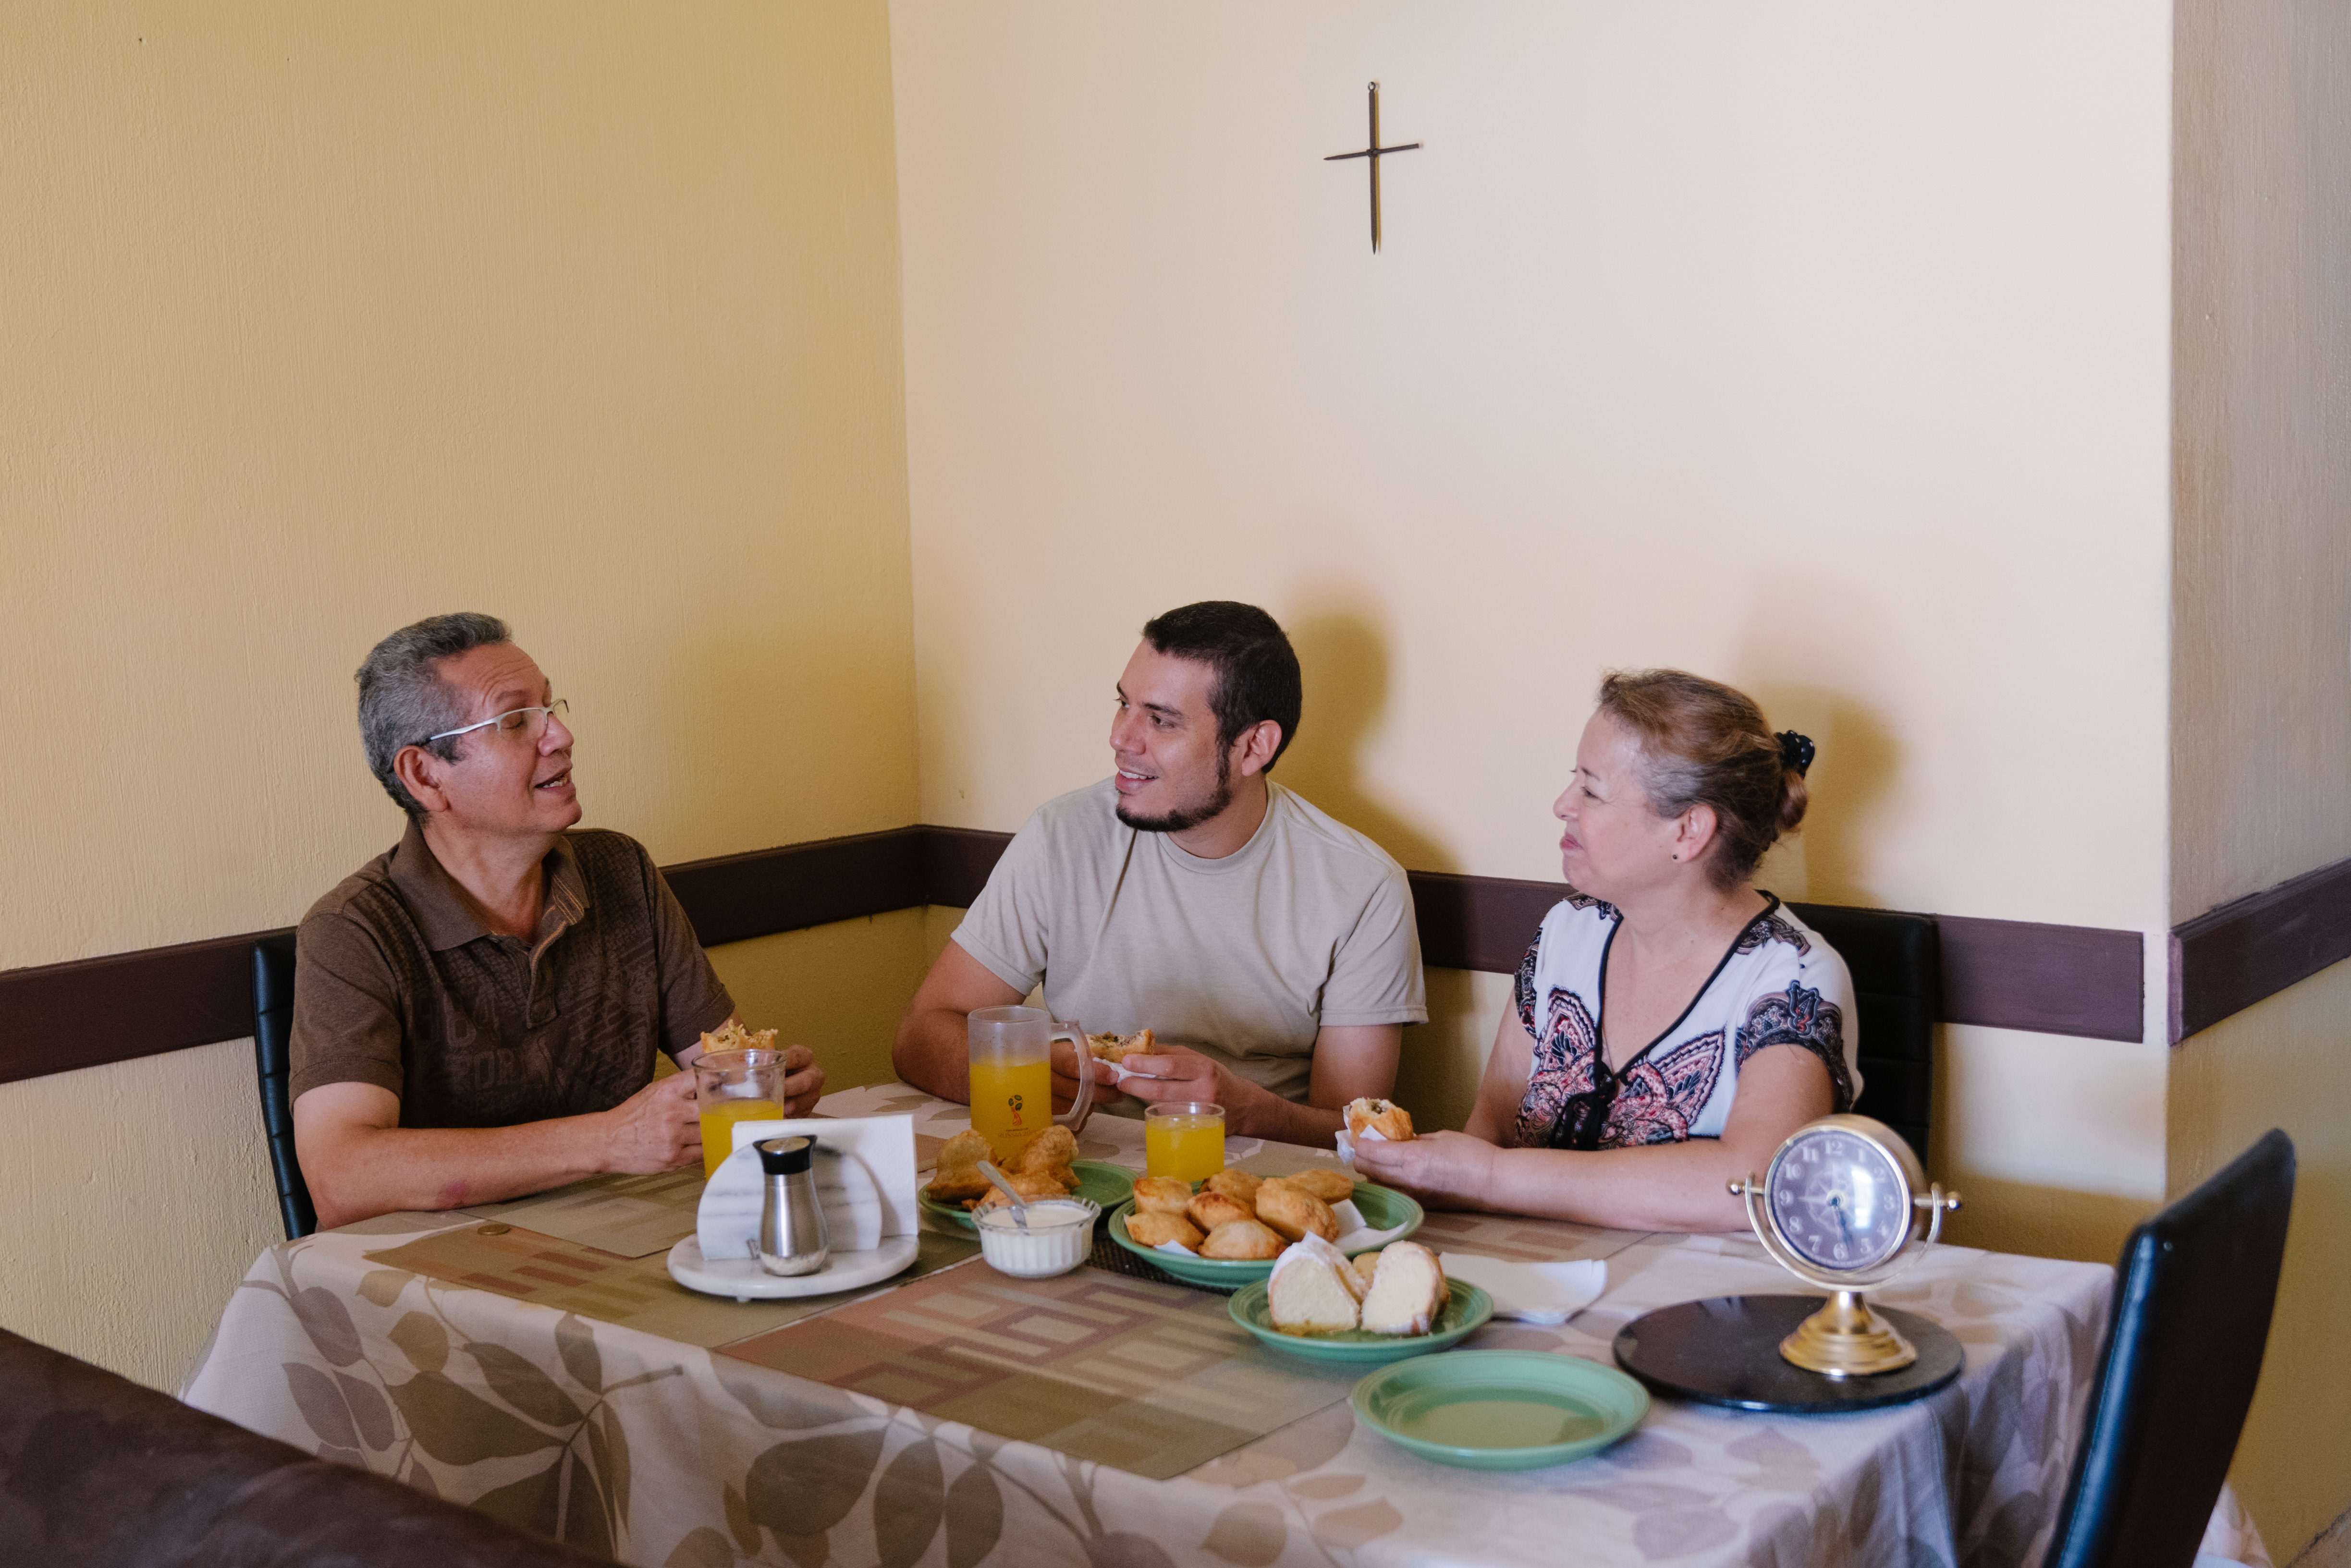 Héctor, Leo and Yesmaira take a break from their sweets confection to enjoy a family breakfast.